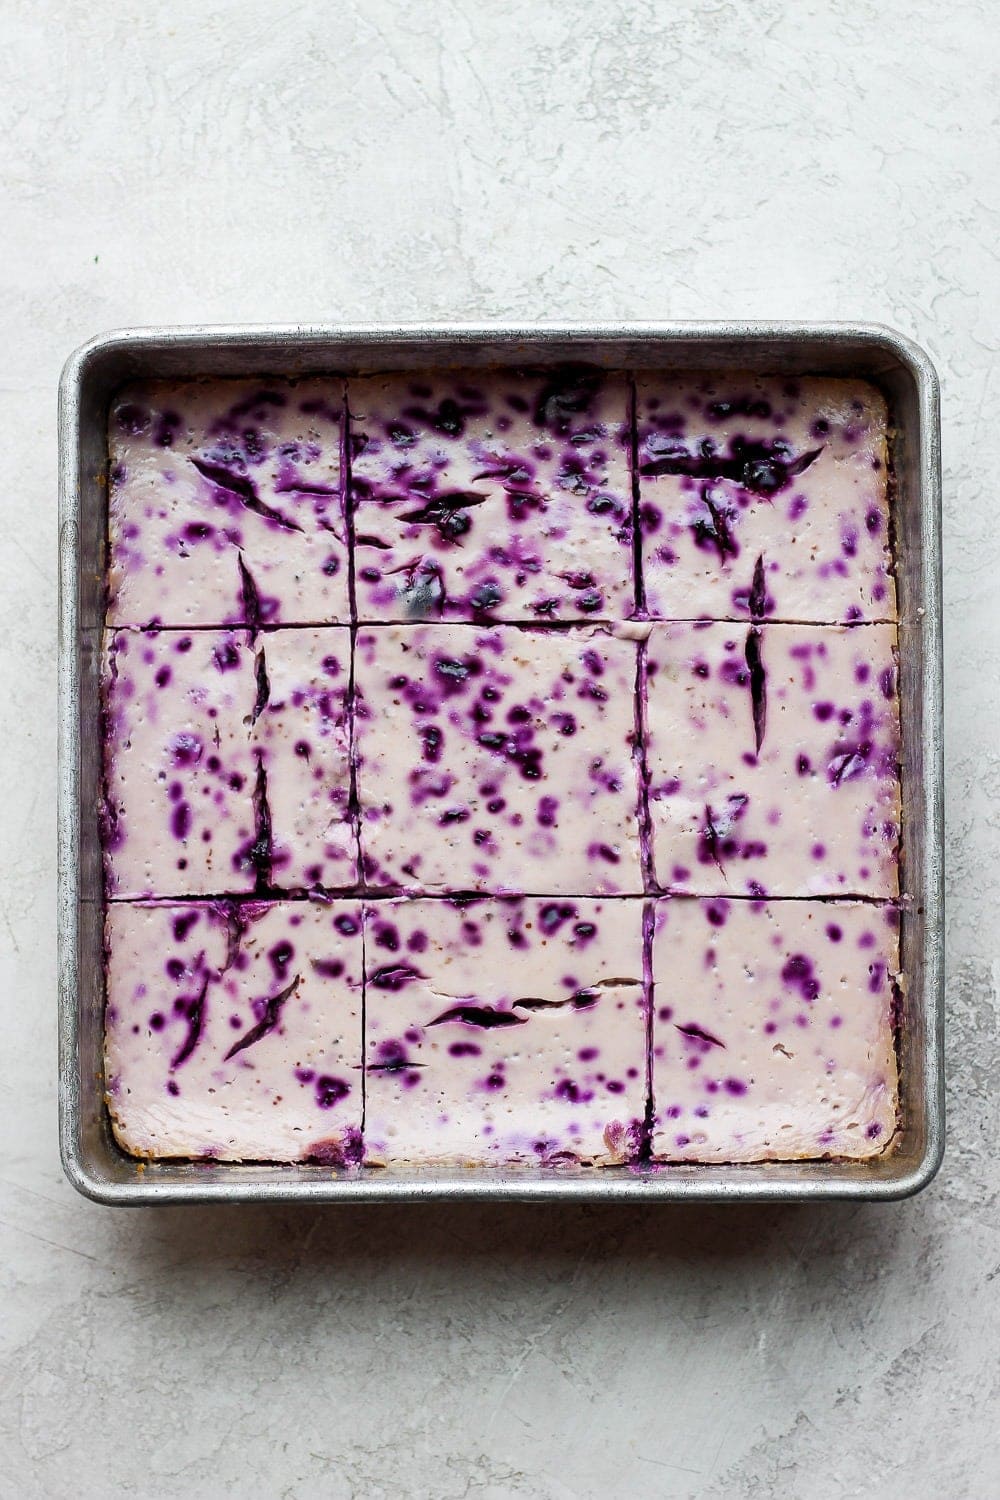 blueberry cheesecake bars after baking in a square baking dish.